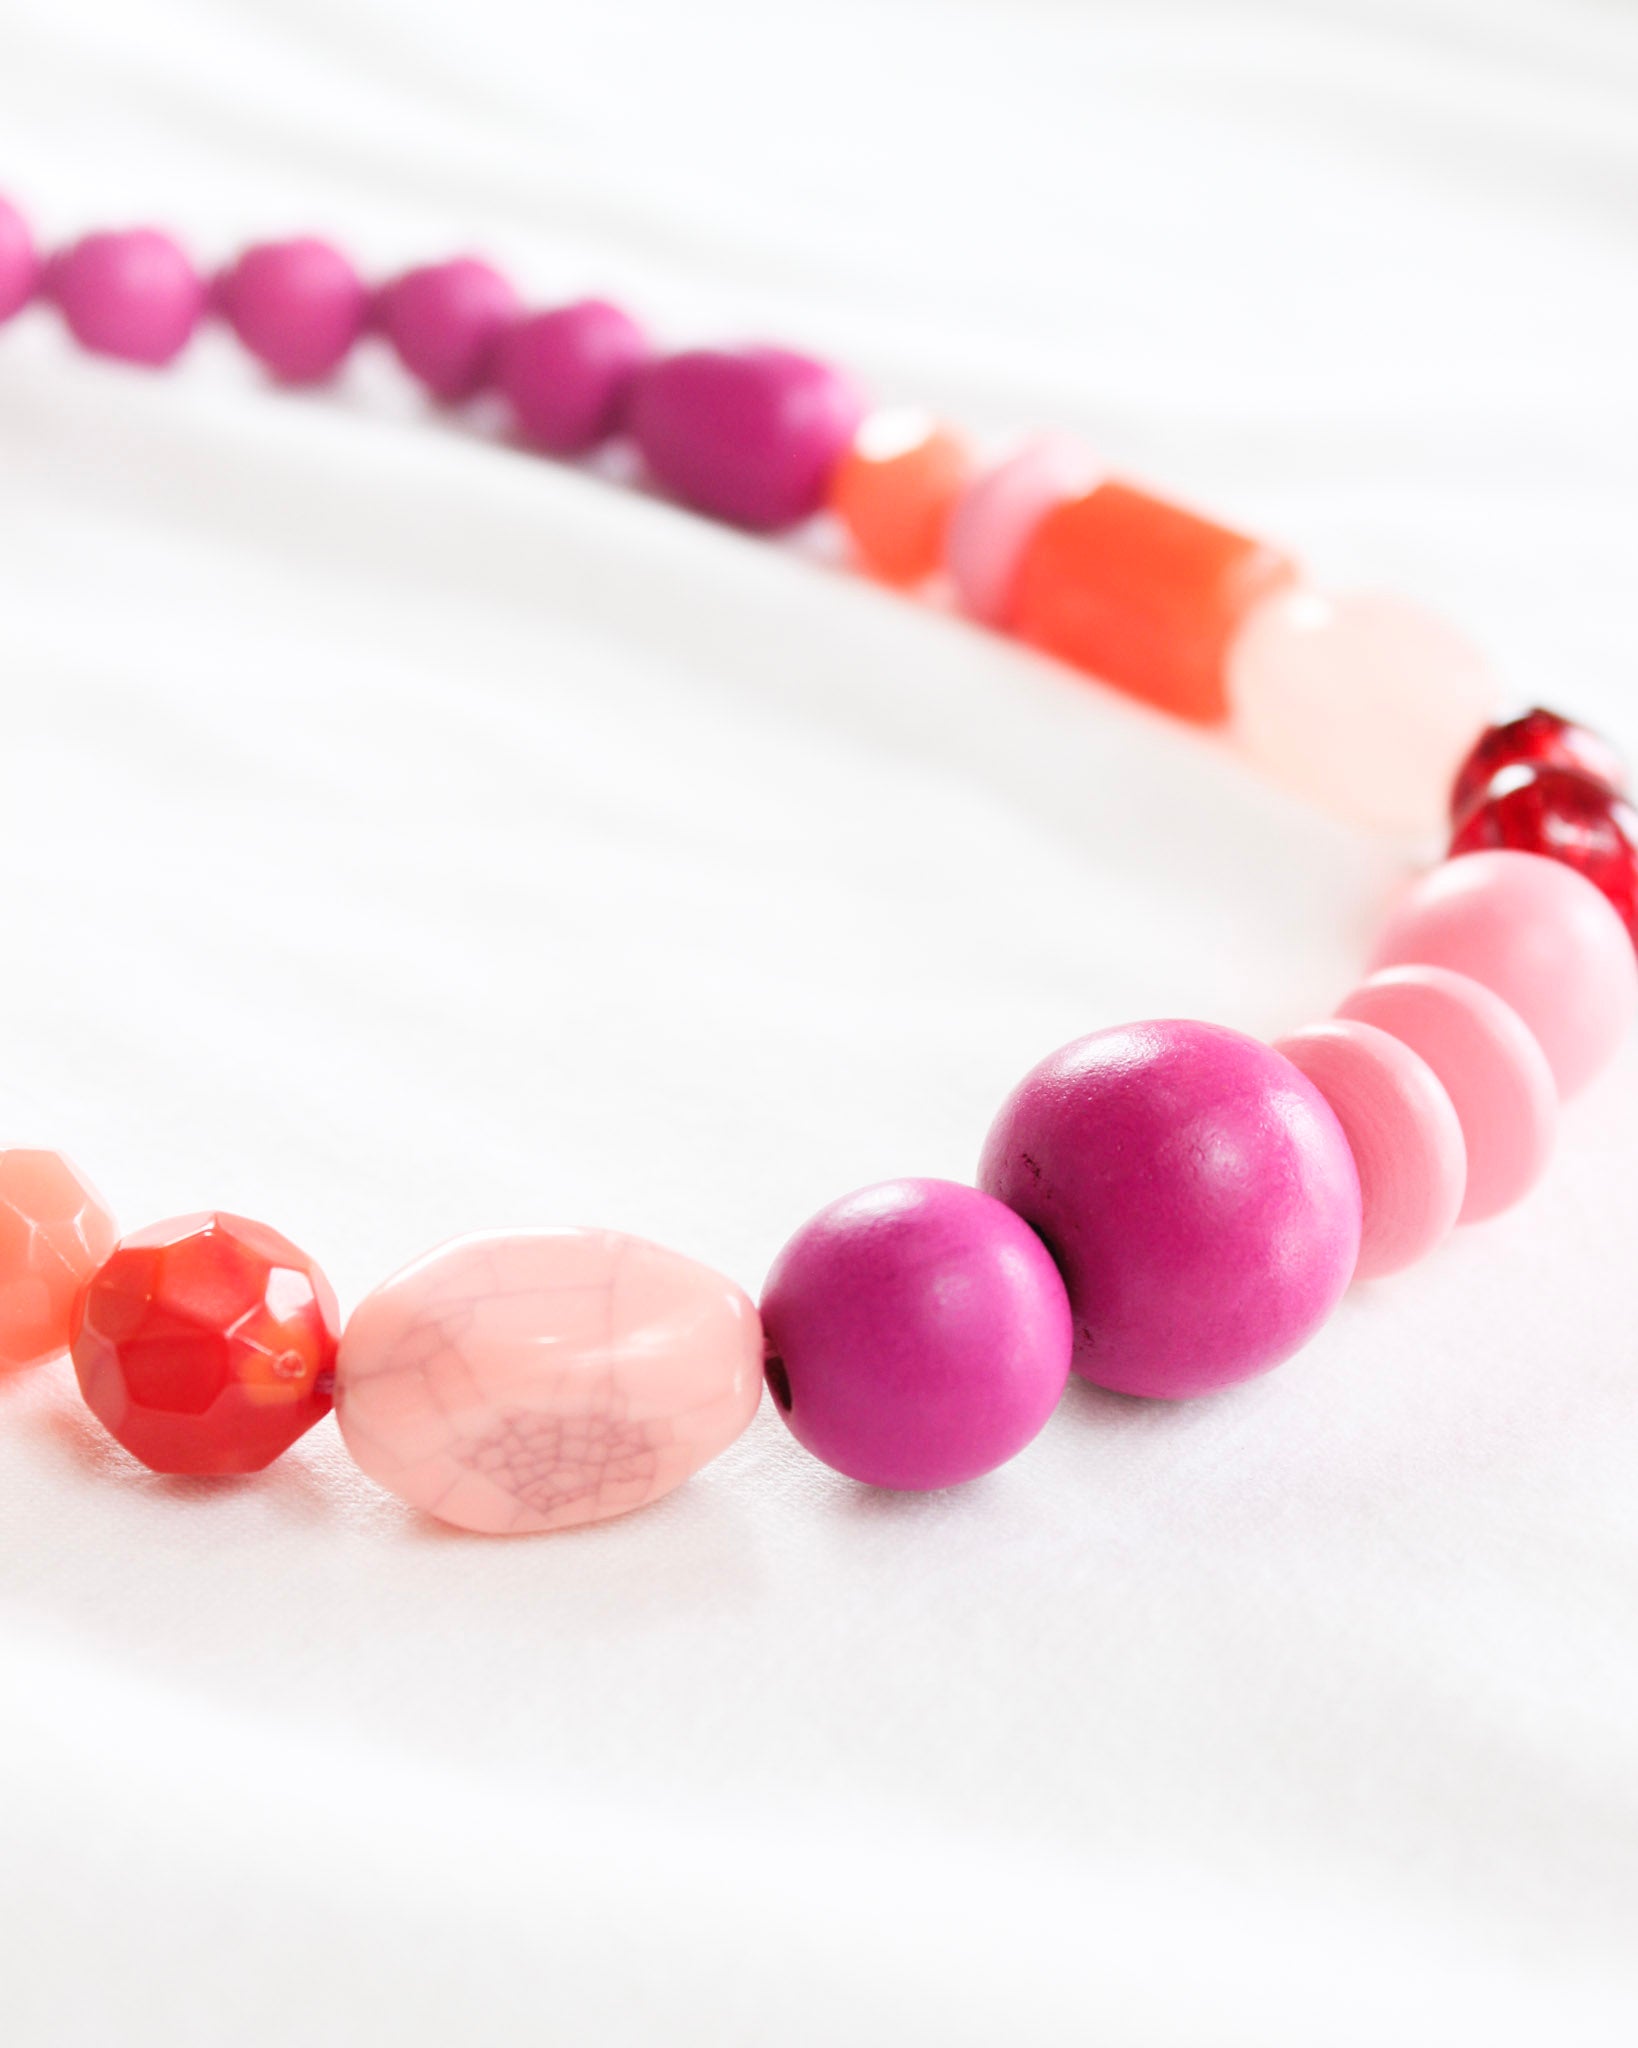 Bright pink and red mix beaded necklace with easy closure